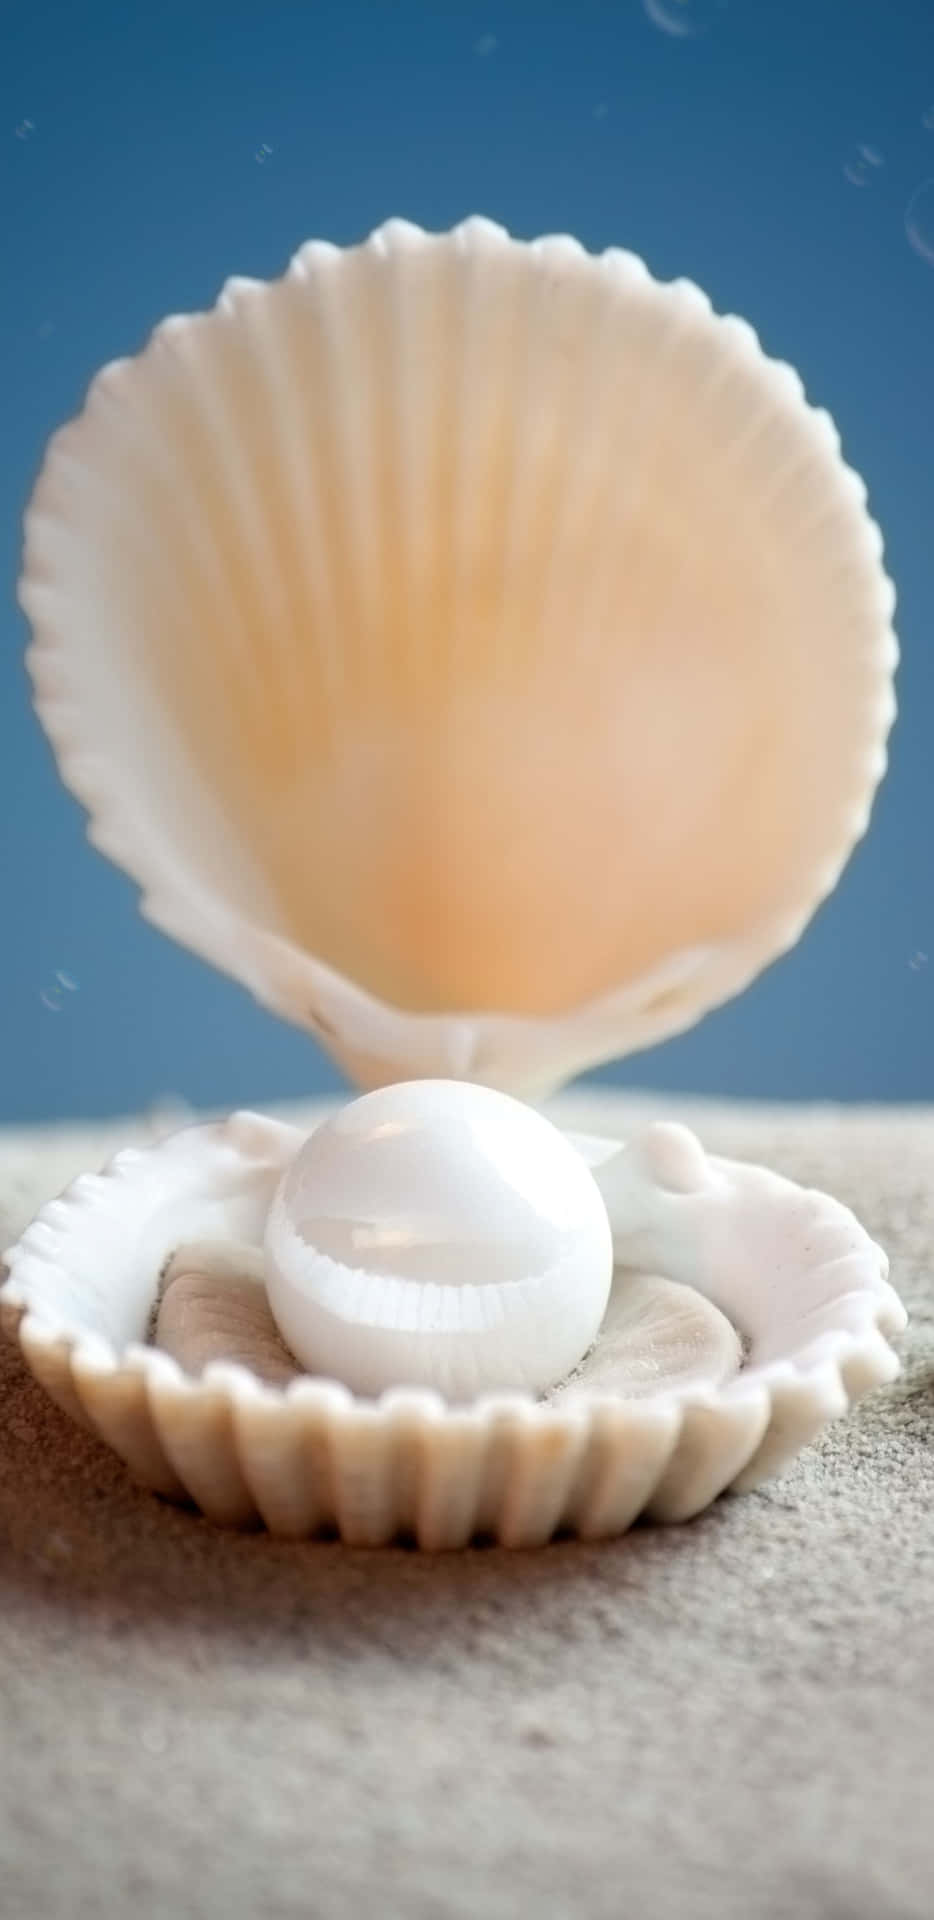 A Shell With A White Pill Inside Wallpaper